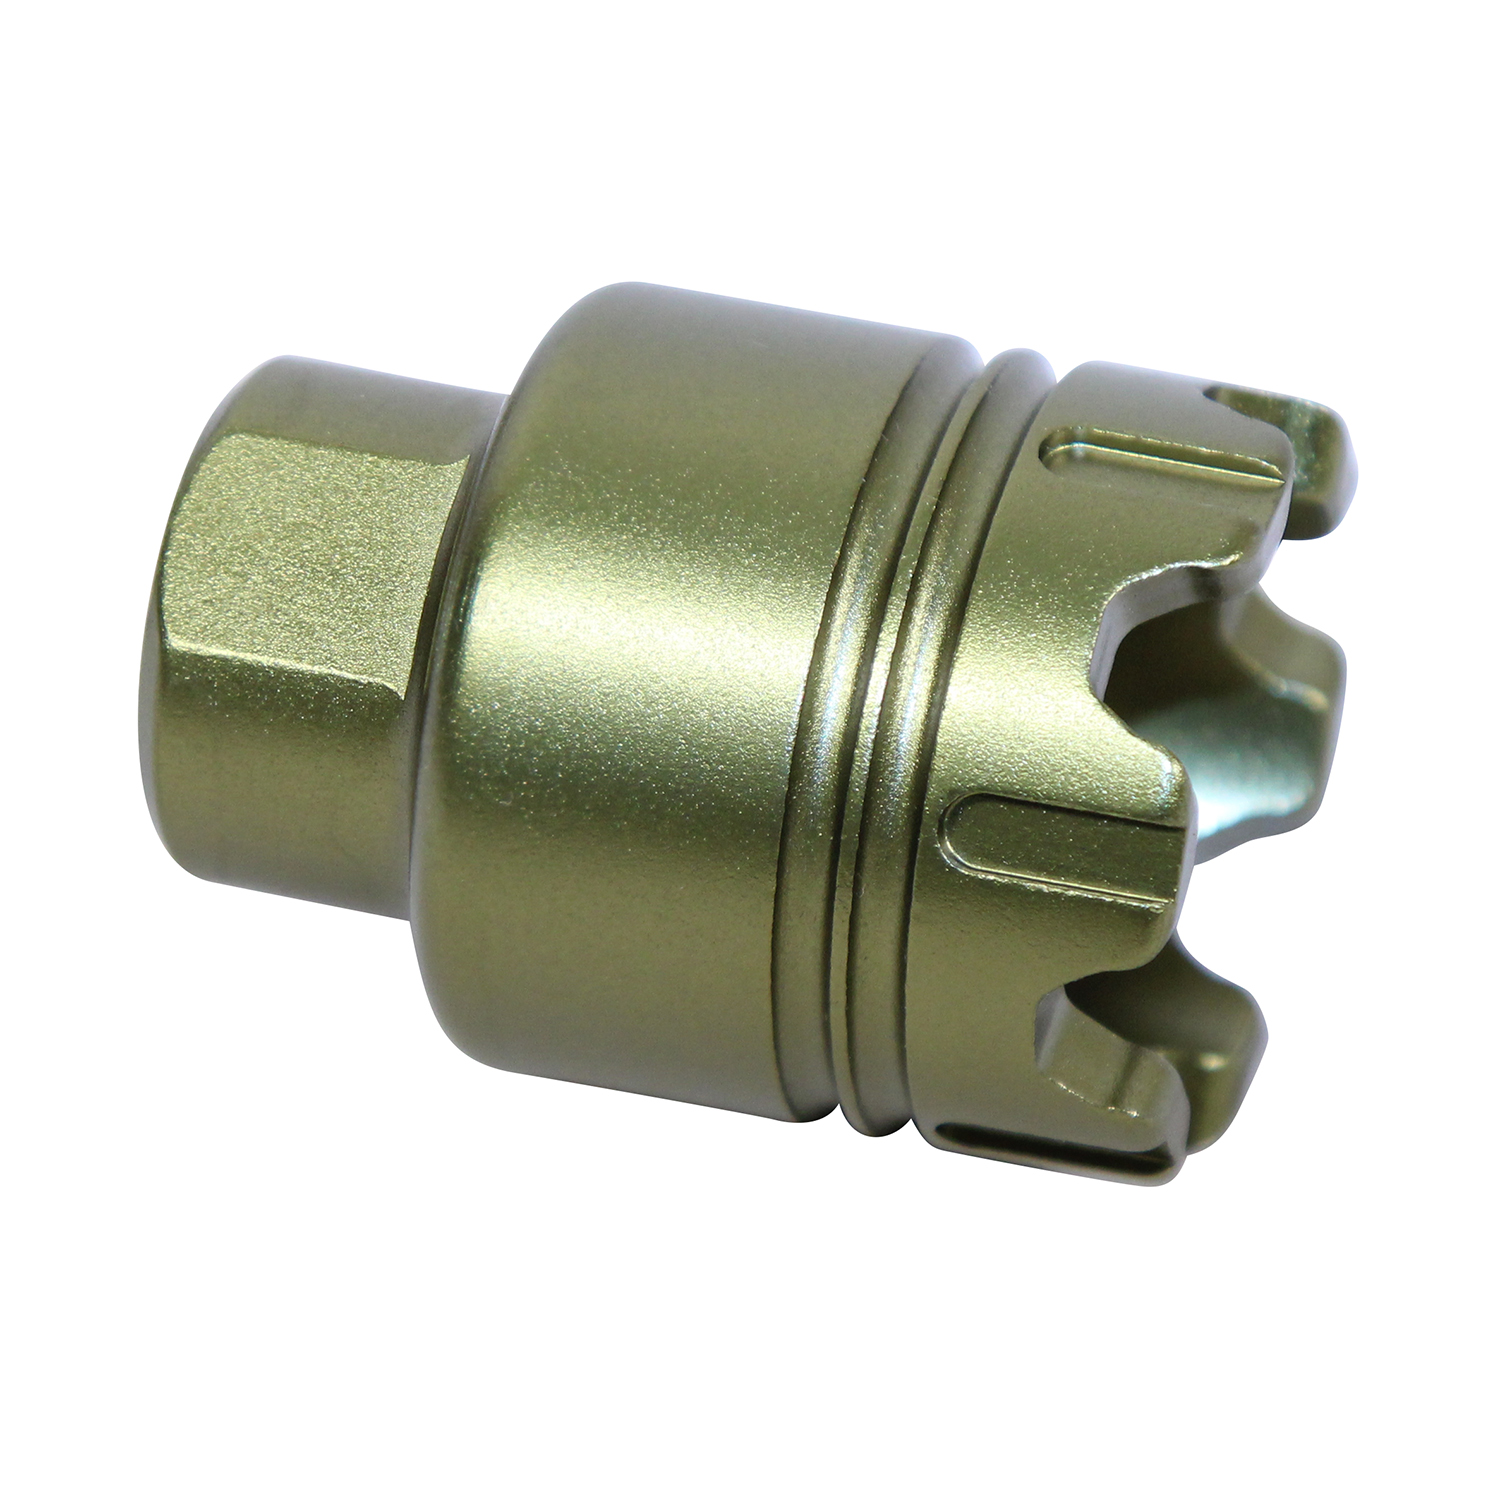 AR-15 Mini 'Trident' Flash Can With Glass Breaker (9mm) (Anodized Green)